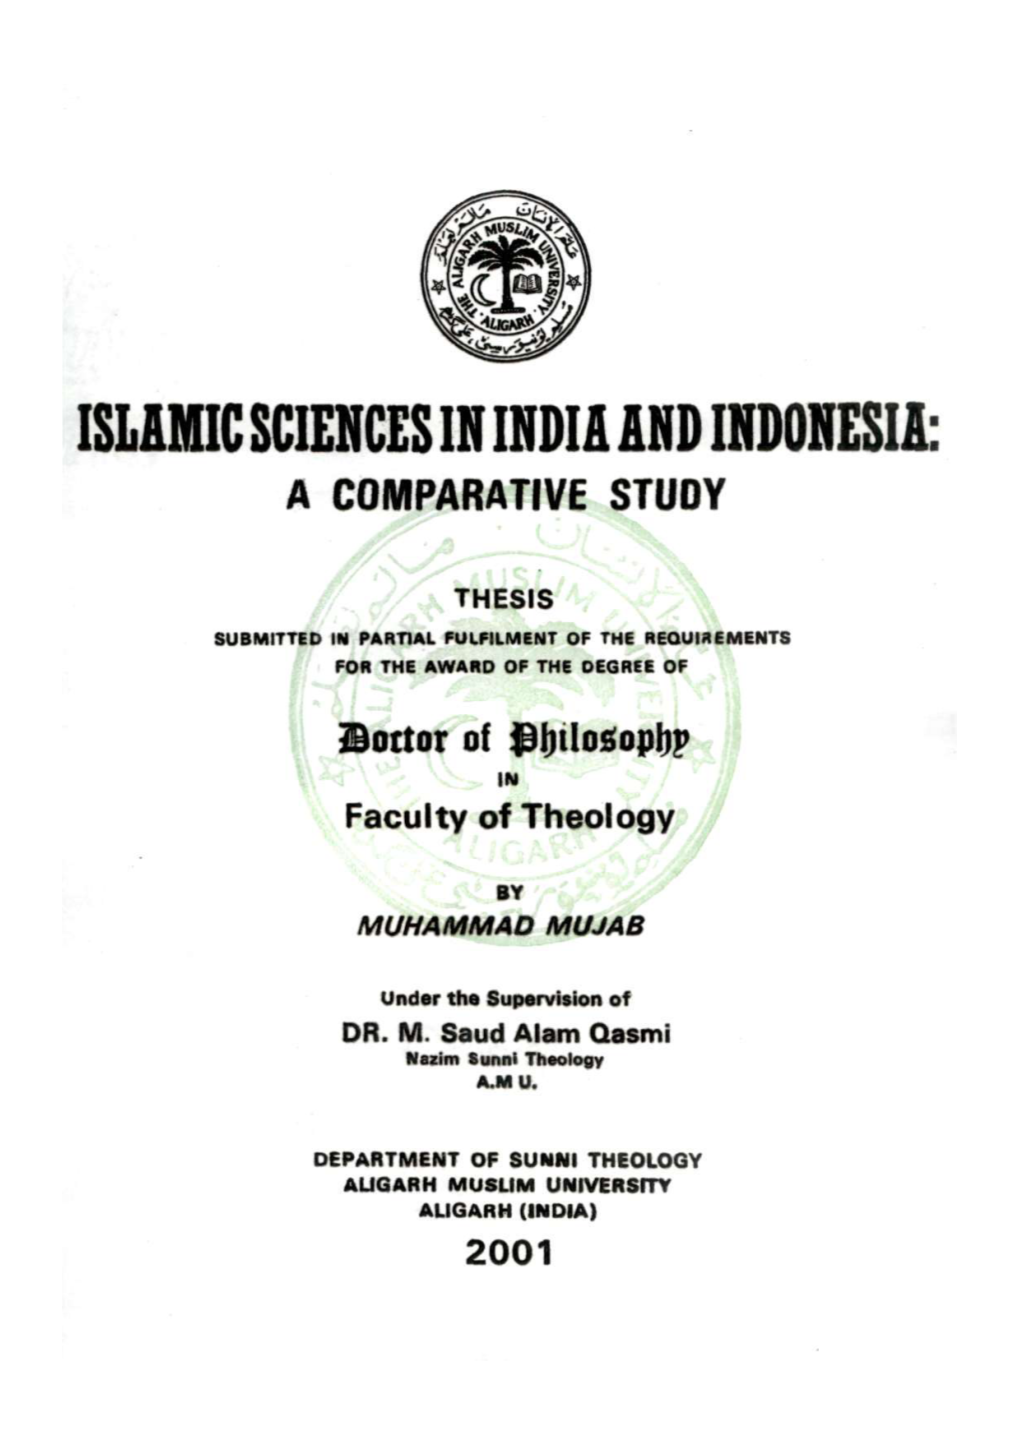 Islamic Sciences in India and Indonesia: a Comparative Study